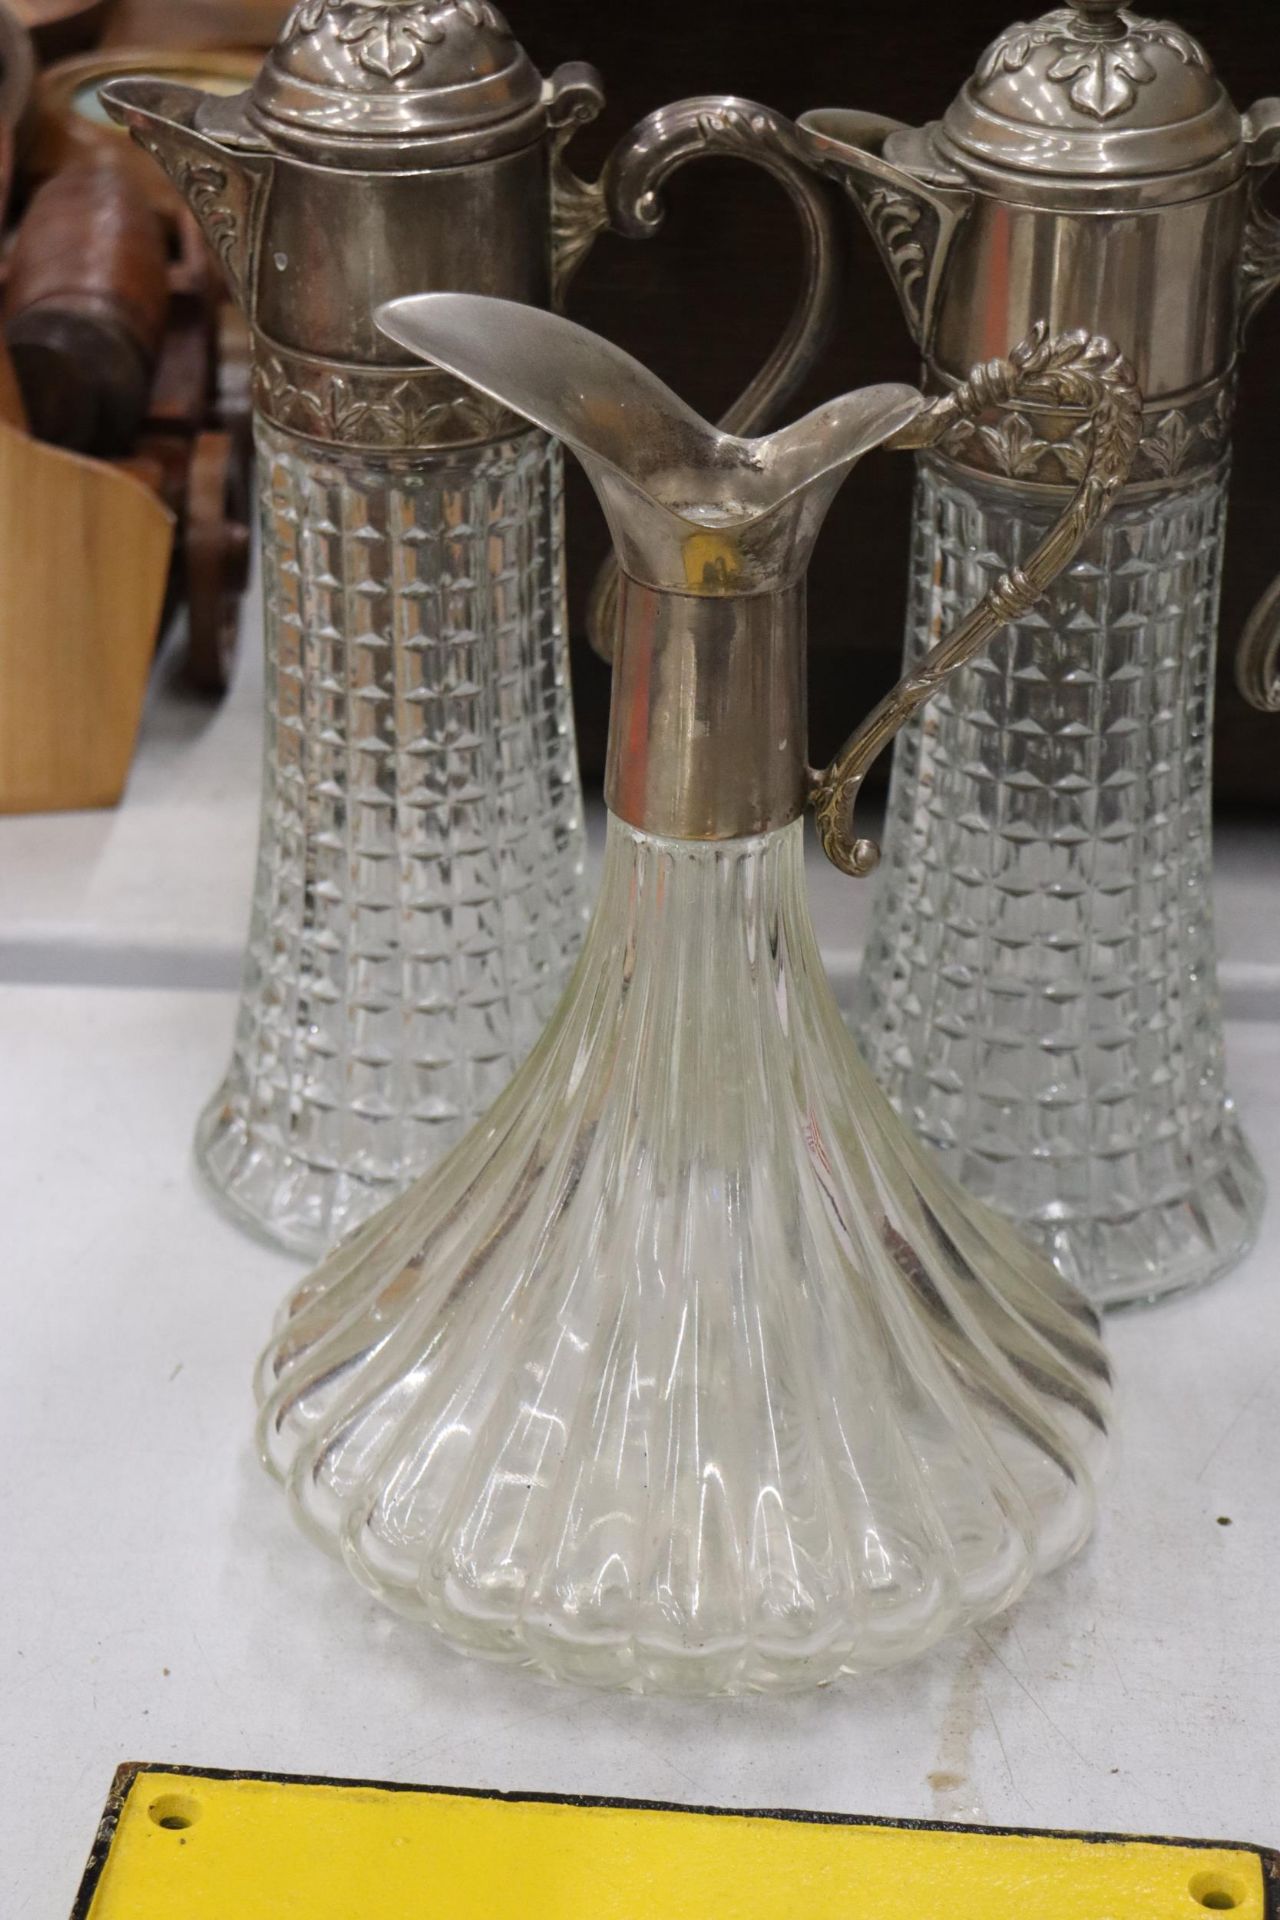 TWO VINTAGE CLARET JUGS WITH SILVER PLATED TOPS PLUS A BELL BOTTOM DECANTER MISSING FINIAL - Image 5 of 8